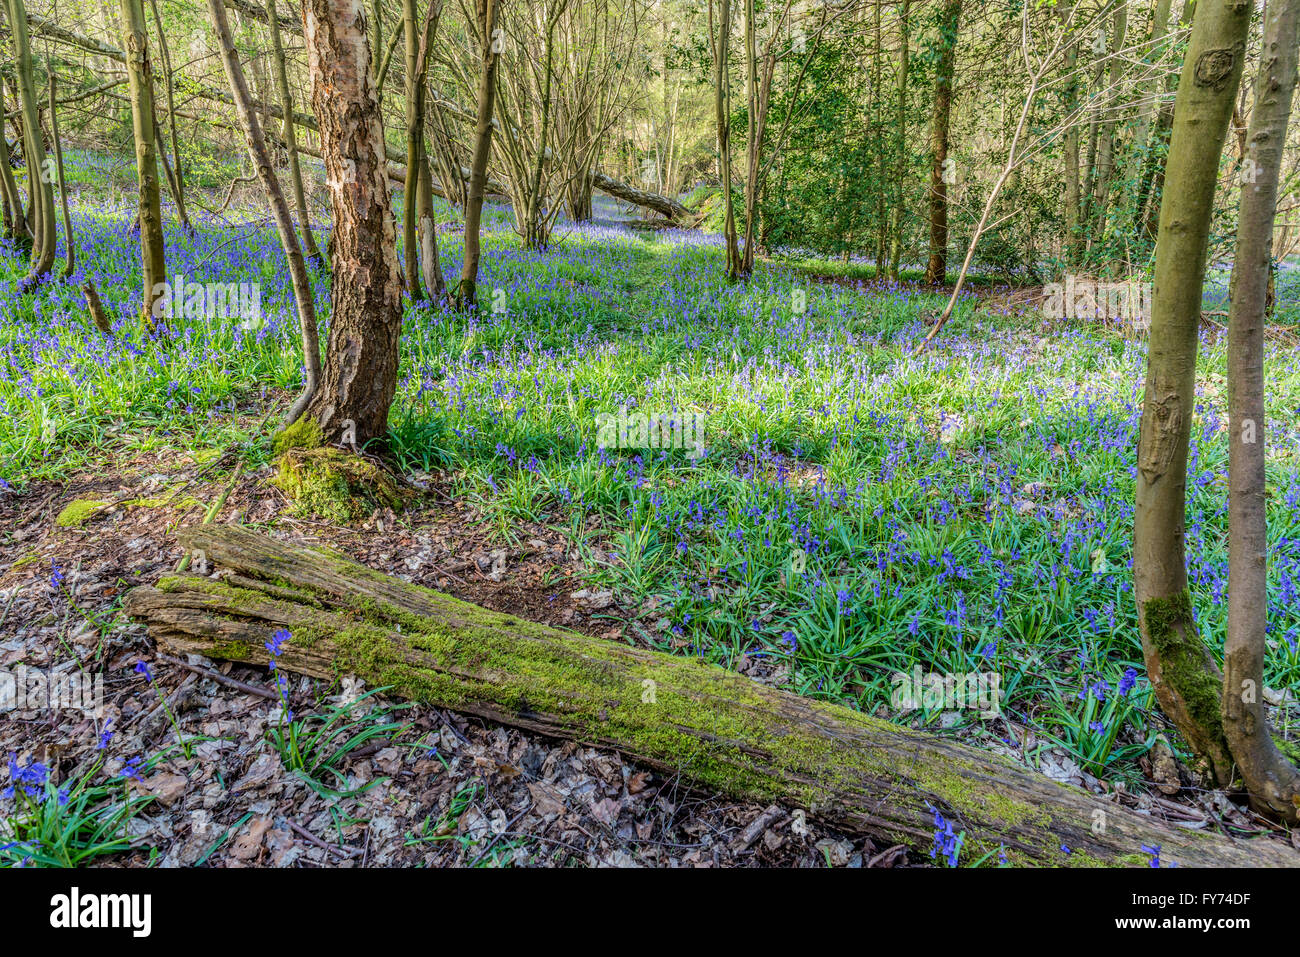 Bluebells covering the floor of an ancient wood Stock Photo